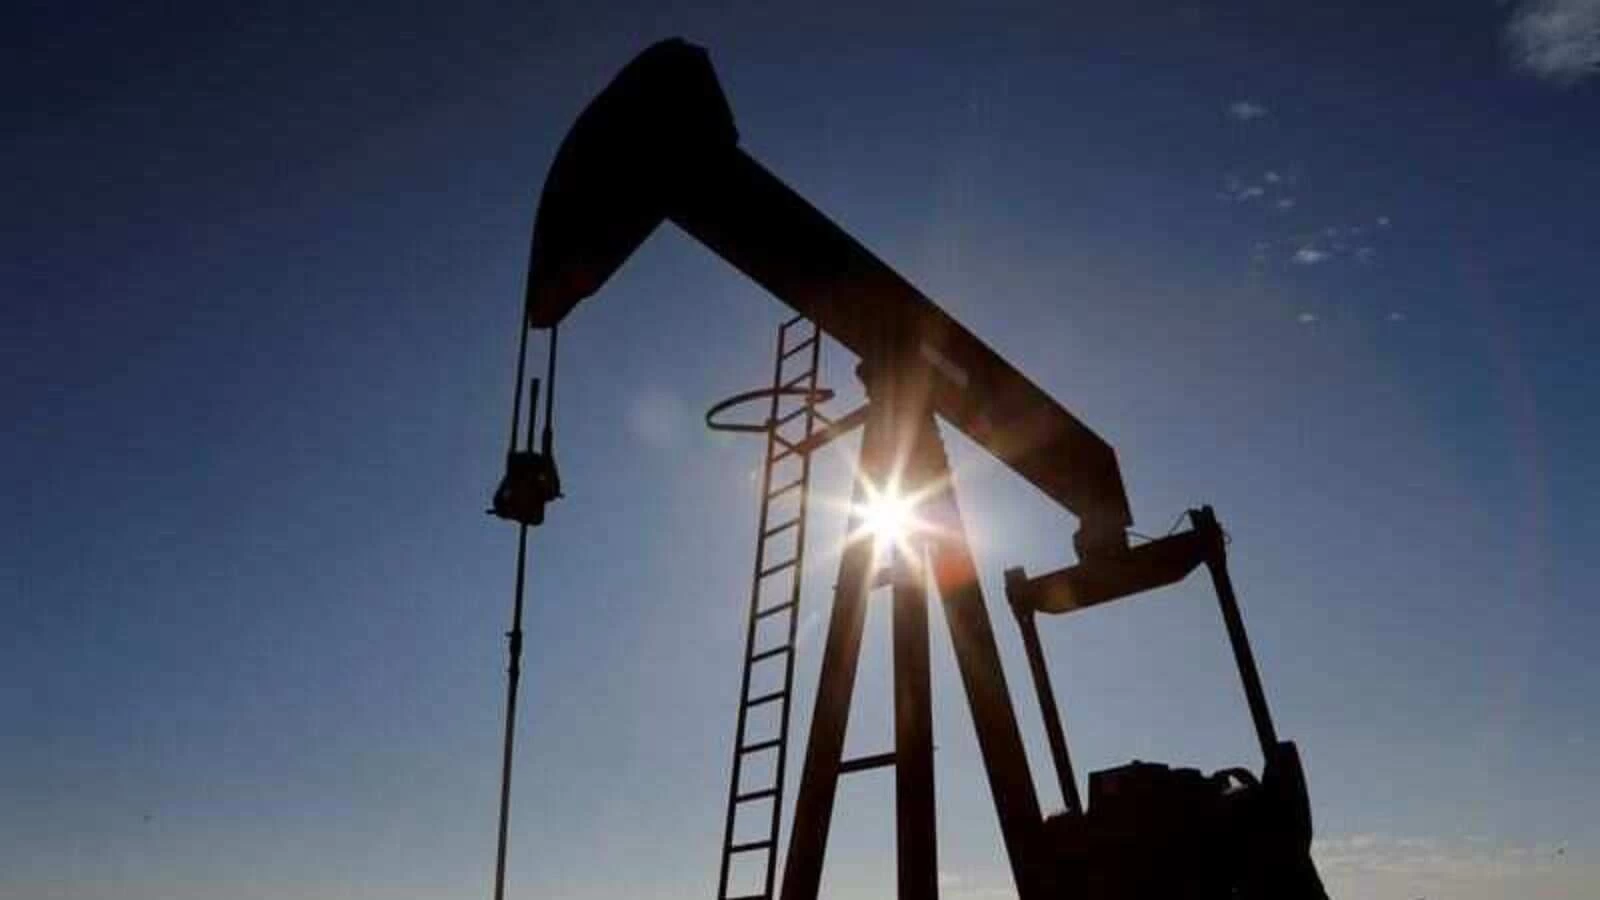 Oil prices set to surge higher on OPEC's output decision